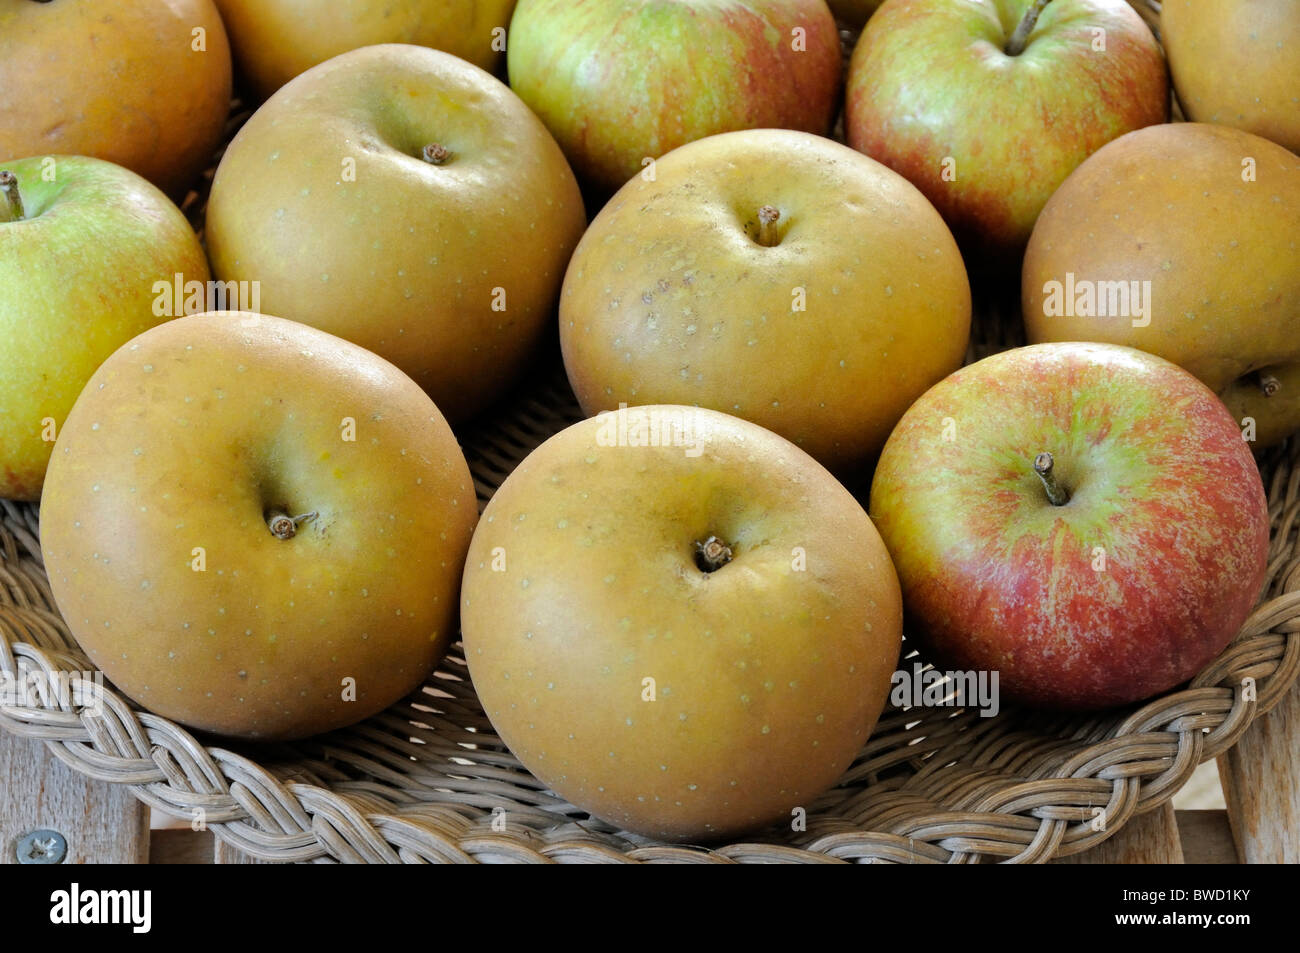 Egremont Russet and Cox Apples in basket Stock Photo